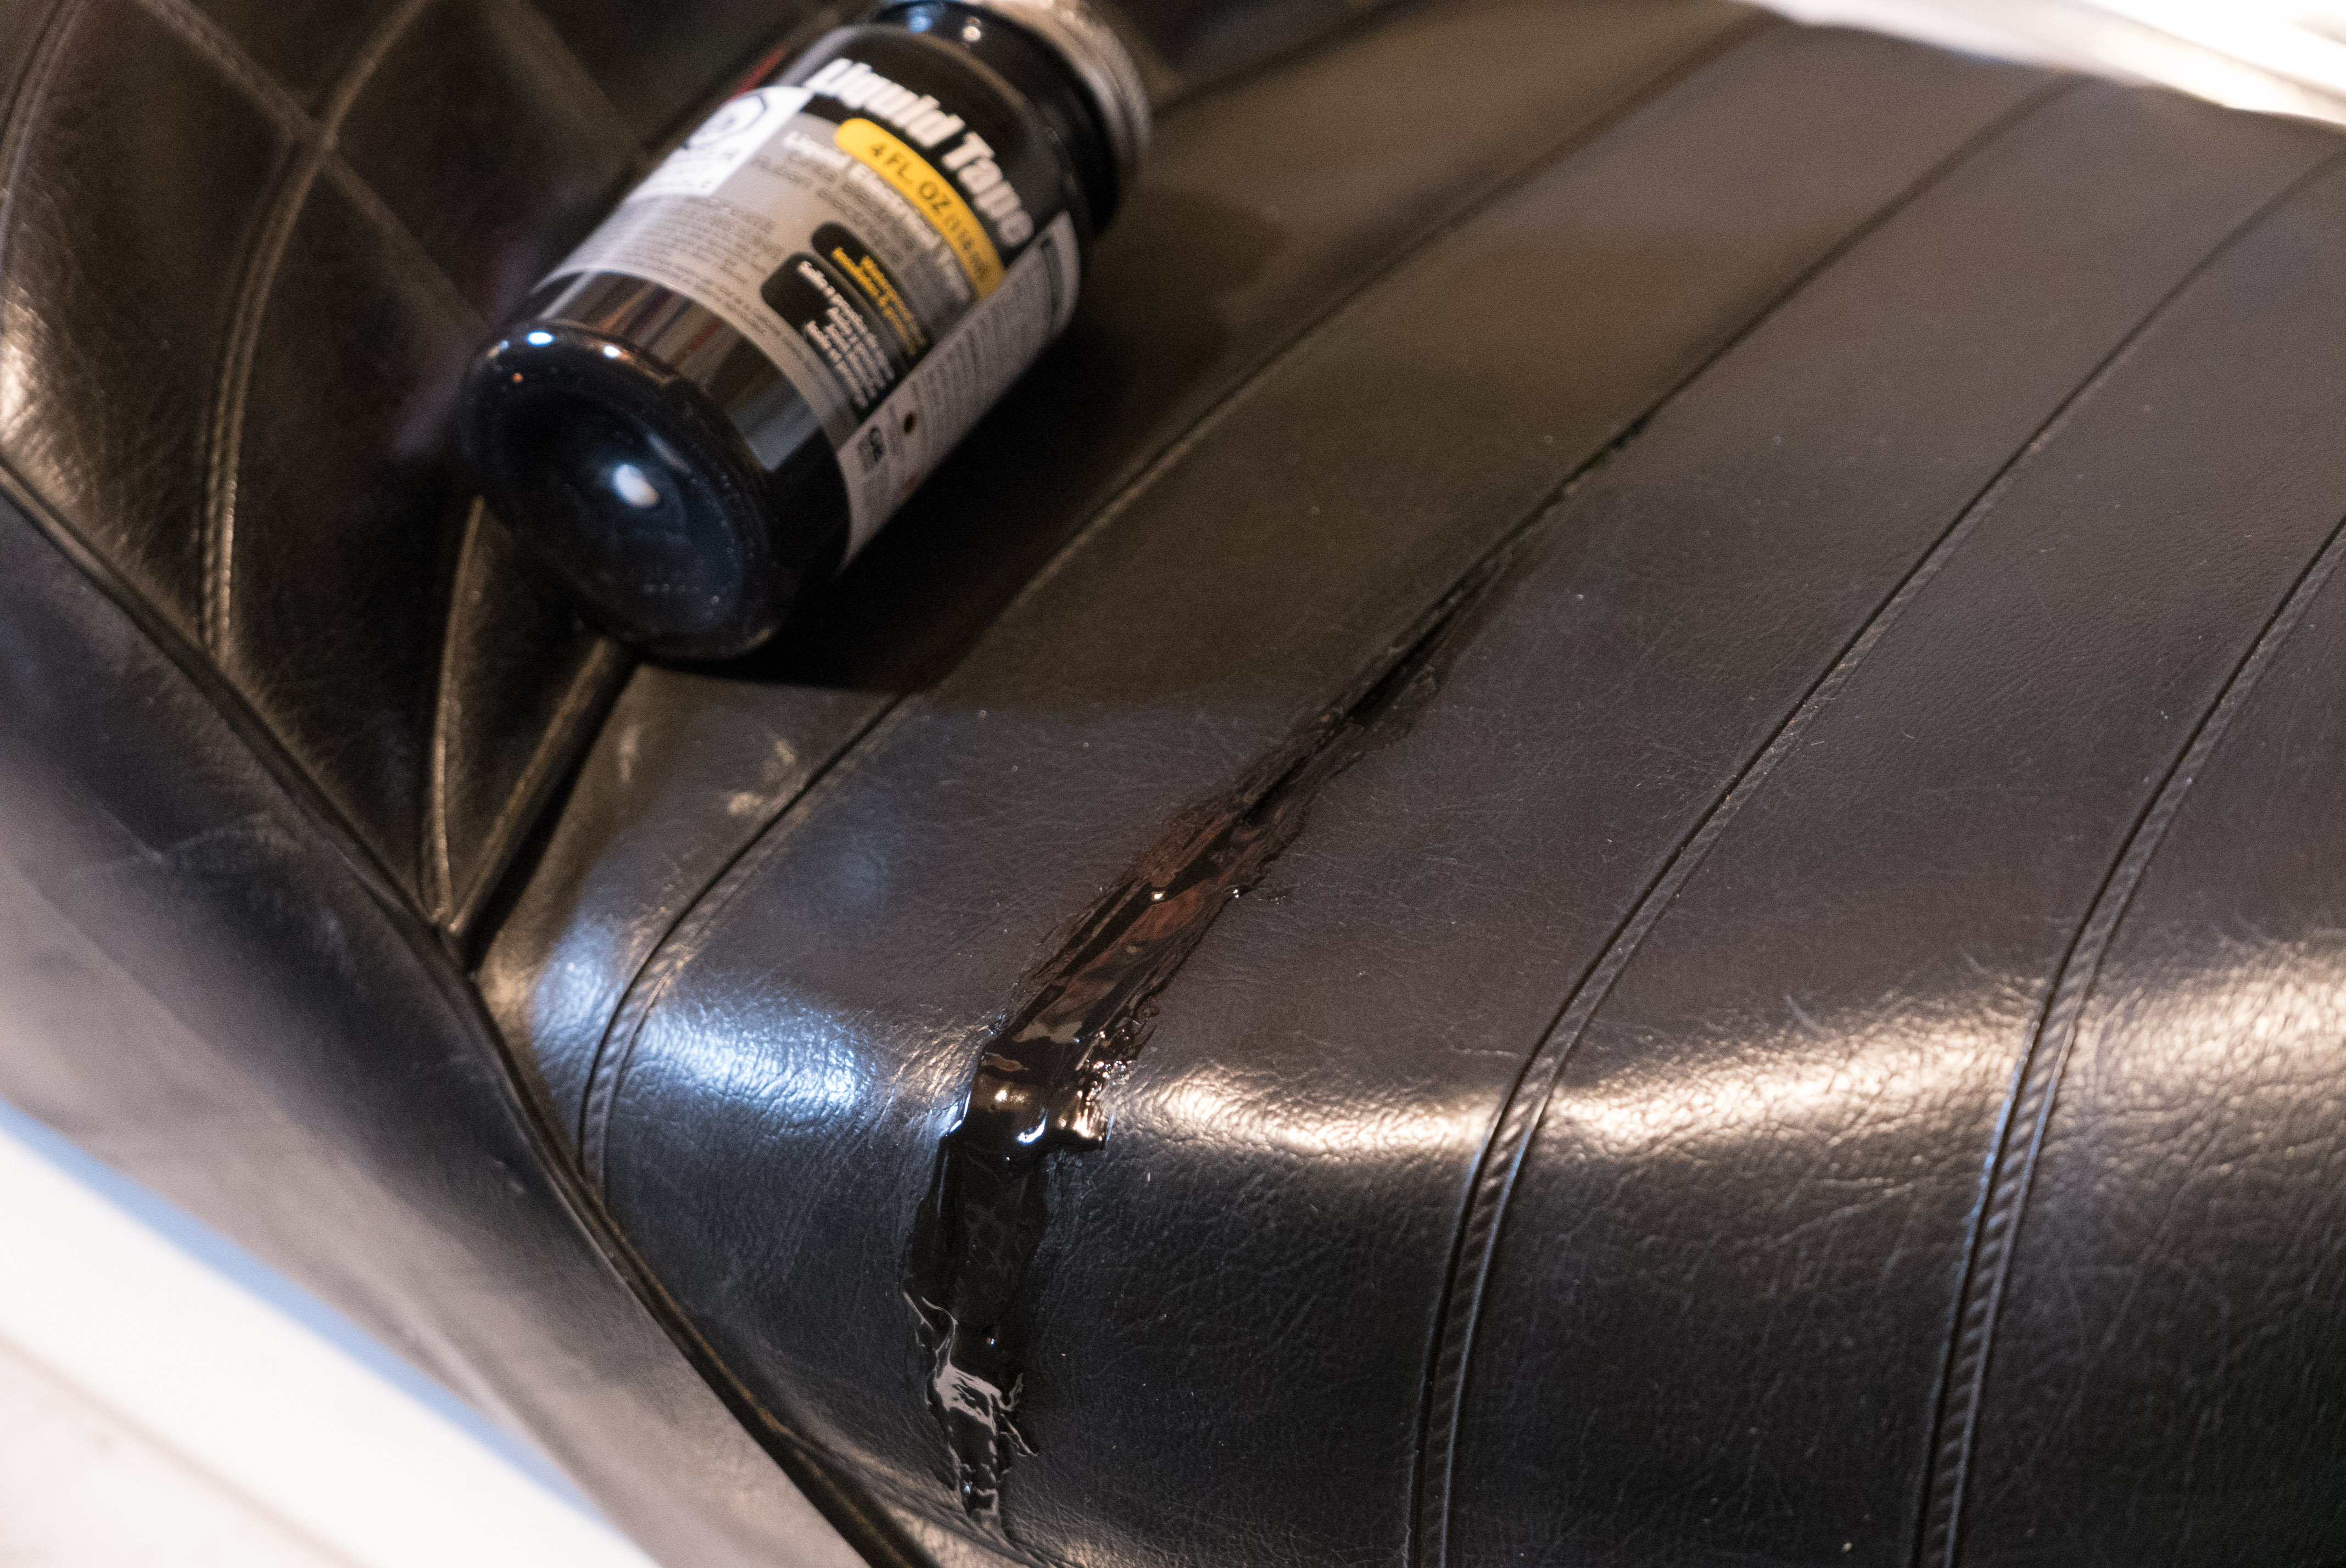 Motorcycle Seat Repair – Liquid Electrical Tape – PCB Isolation